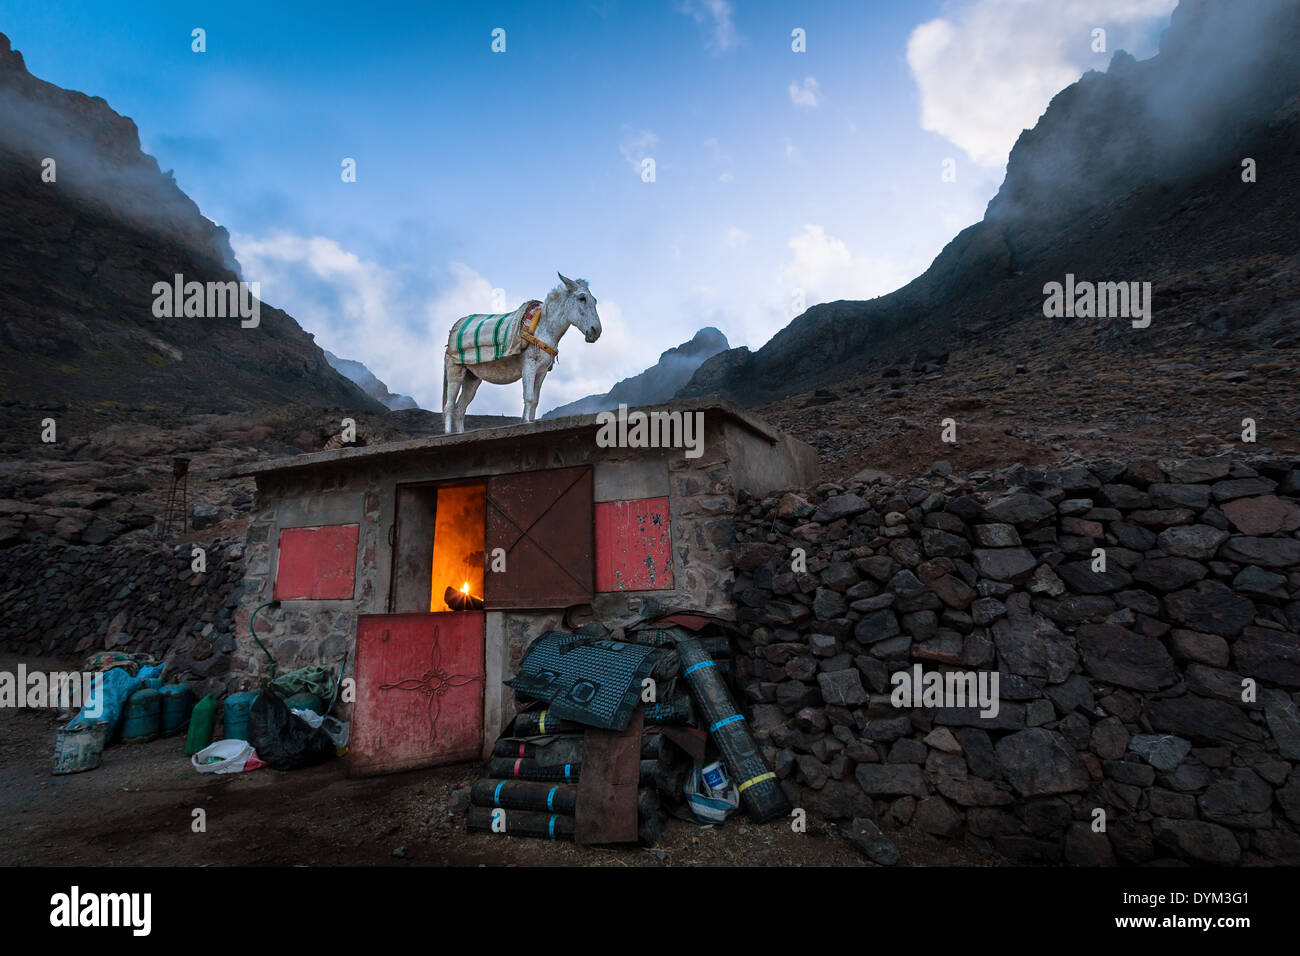 A donkey on a roof at Atlas mountains in Morocco, Africa Stock Photo